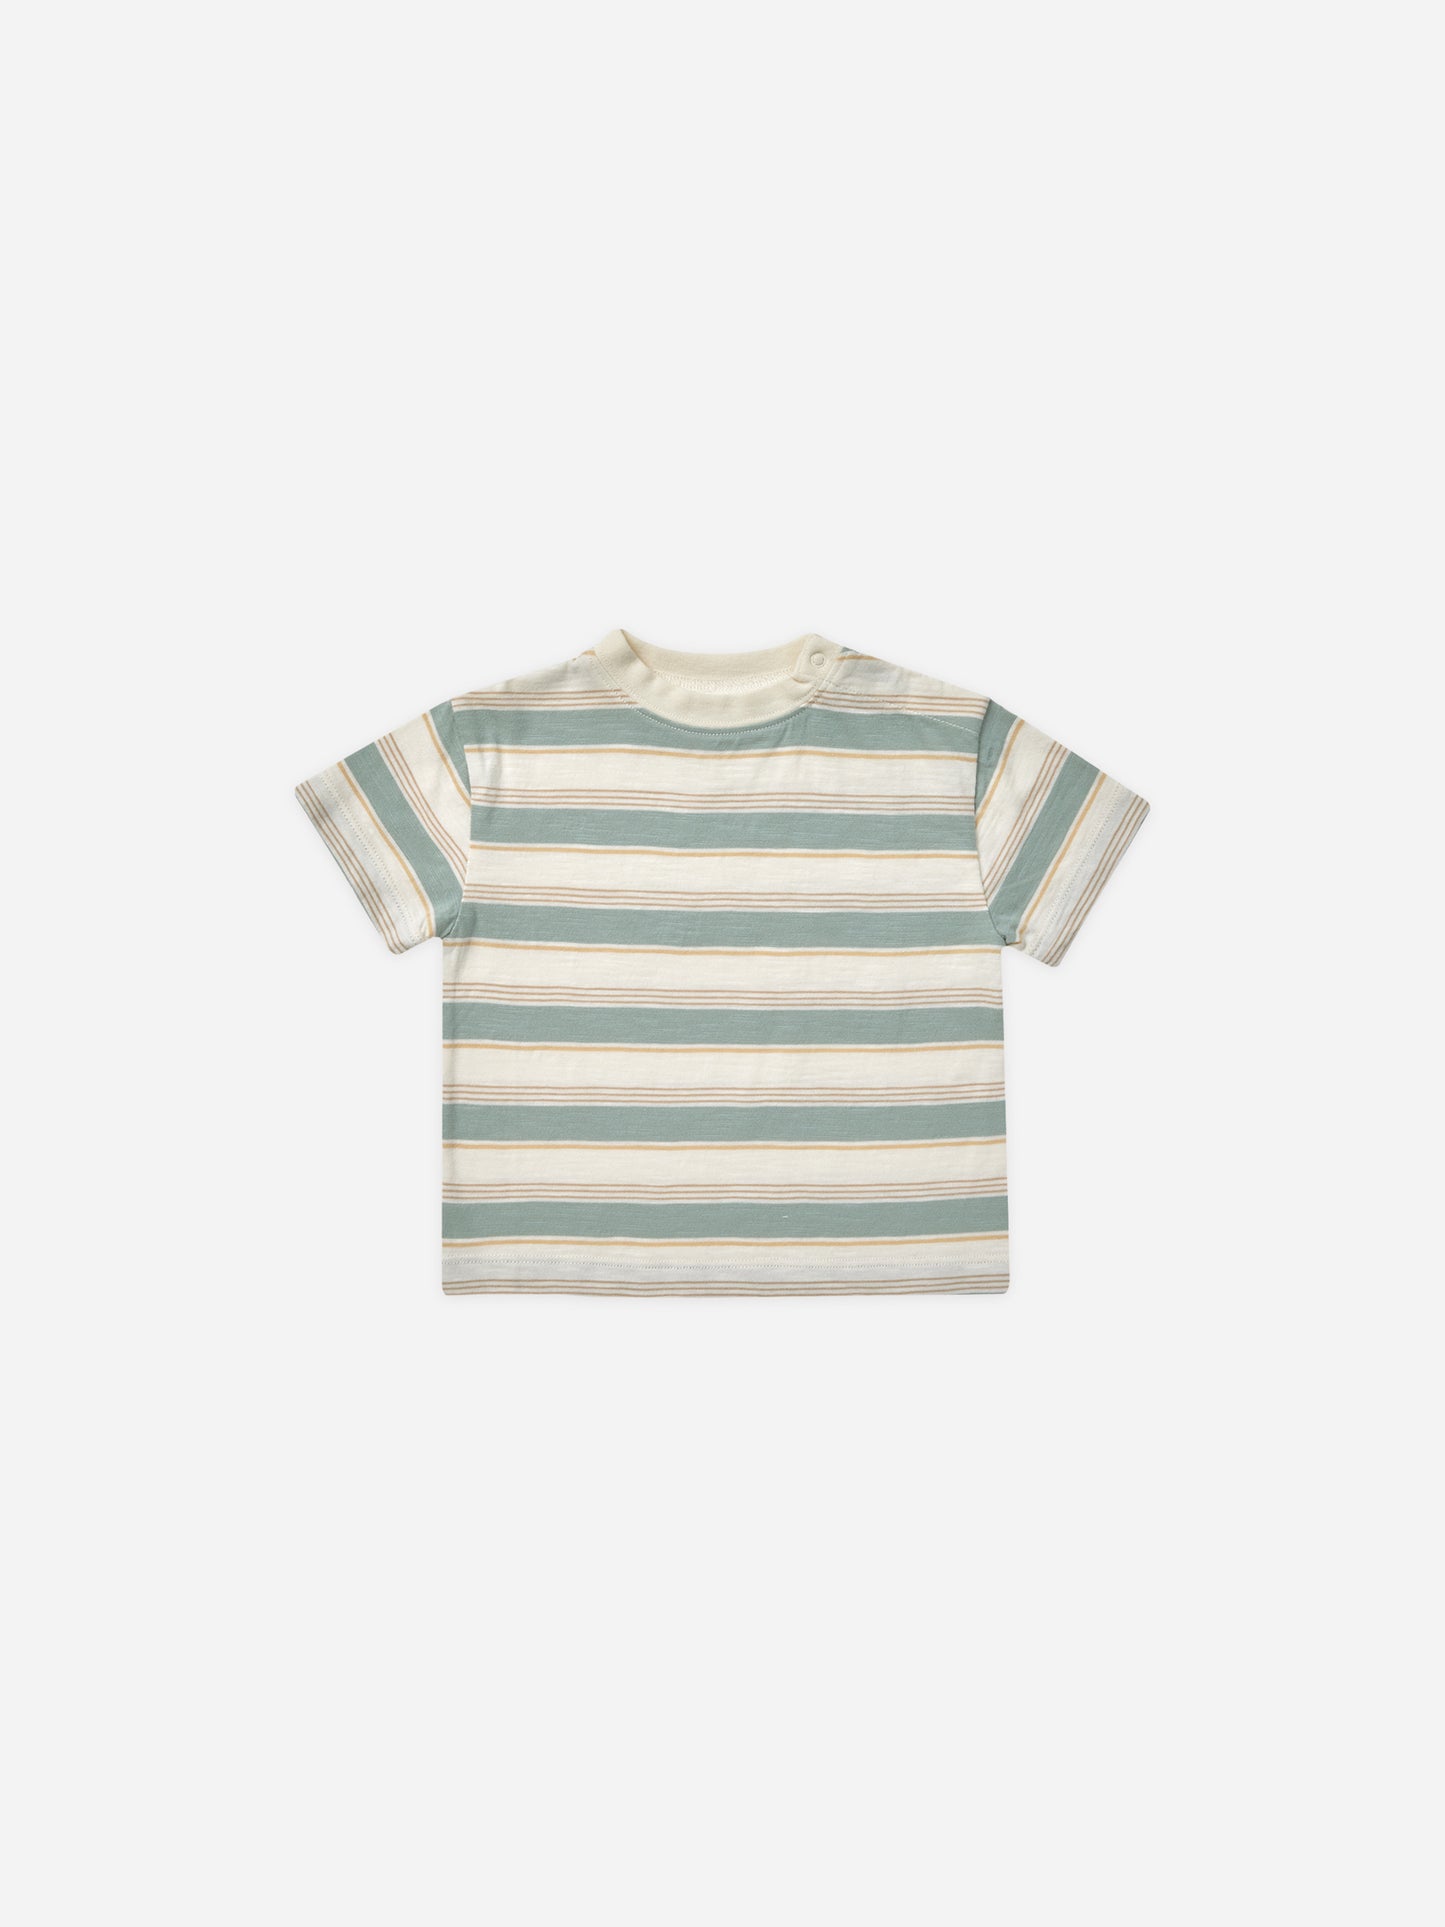 Relaxed Tee || Aqua Stripe - Rylee + Cru | Kids Clothes | Trendy Baby Clothes | Modern Infant Outfits |